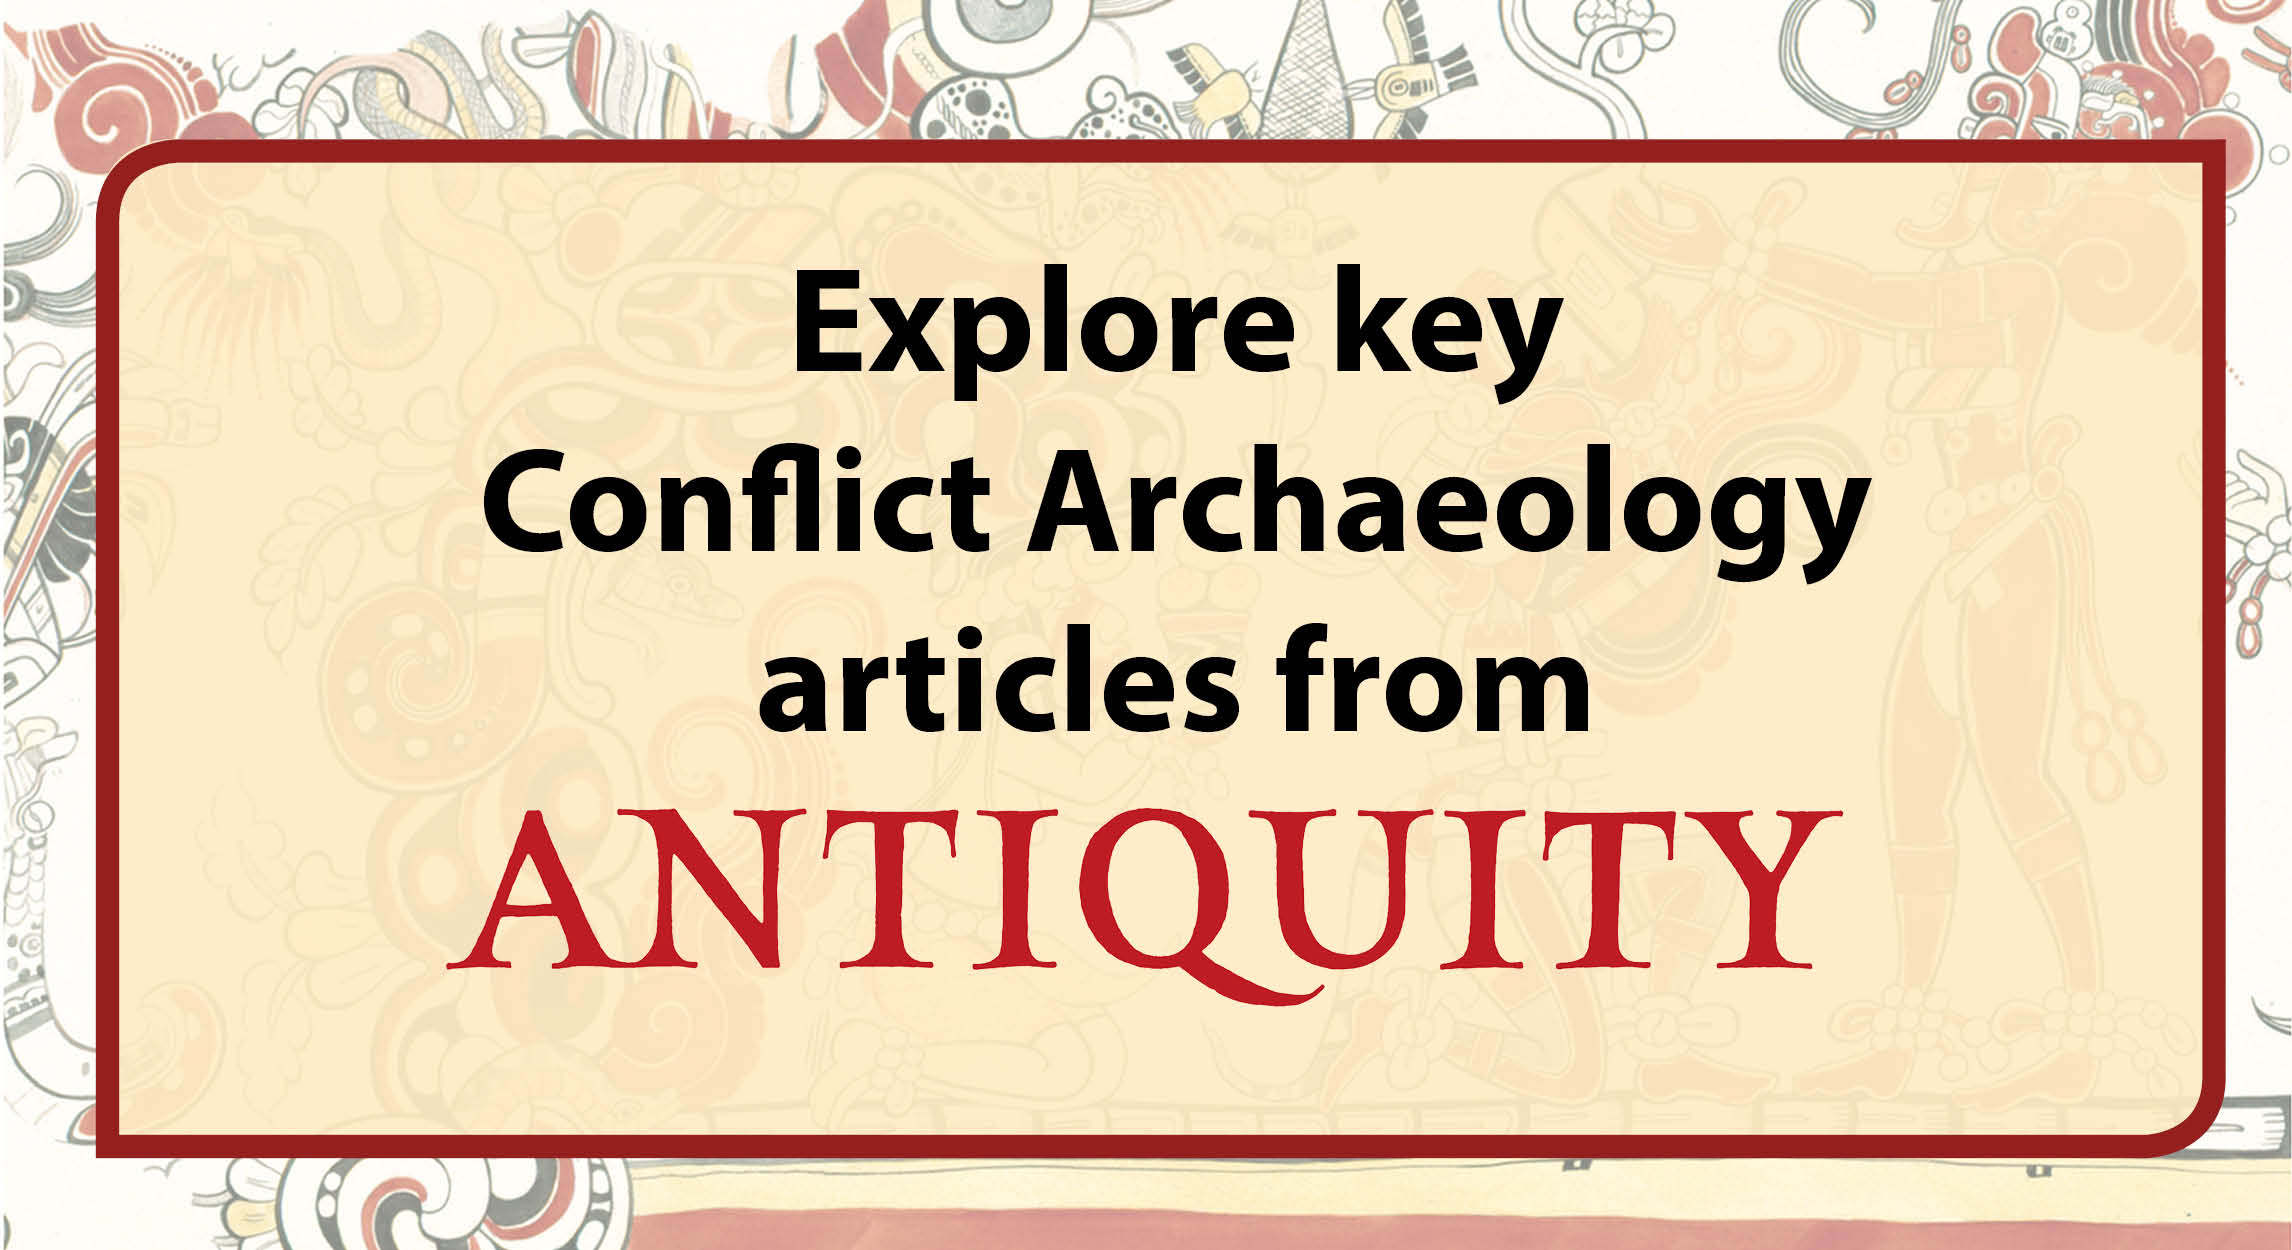 Conflict Archaeology